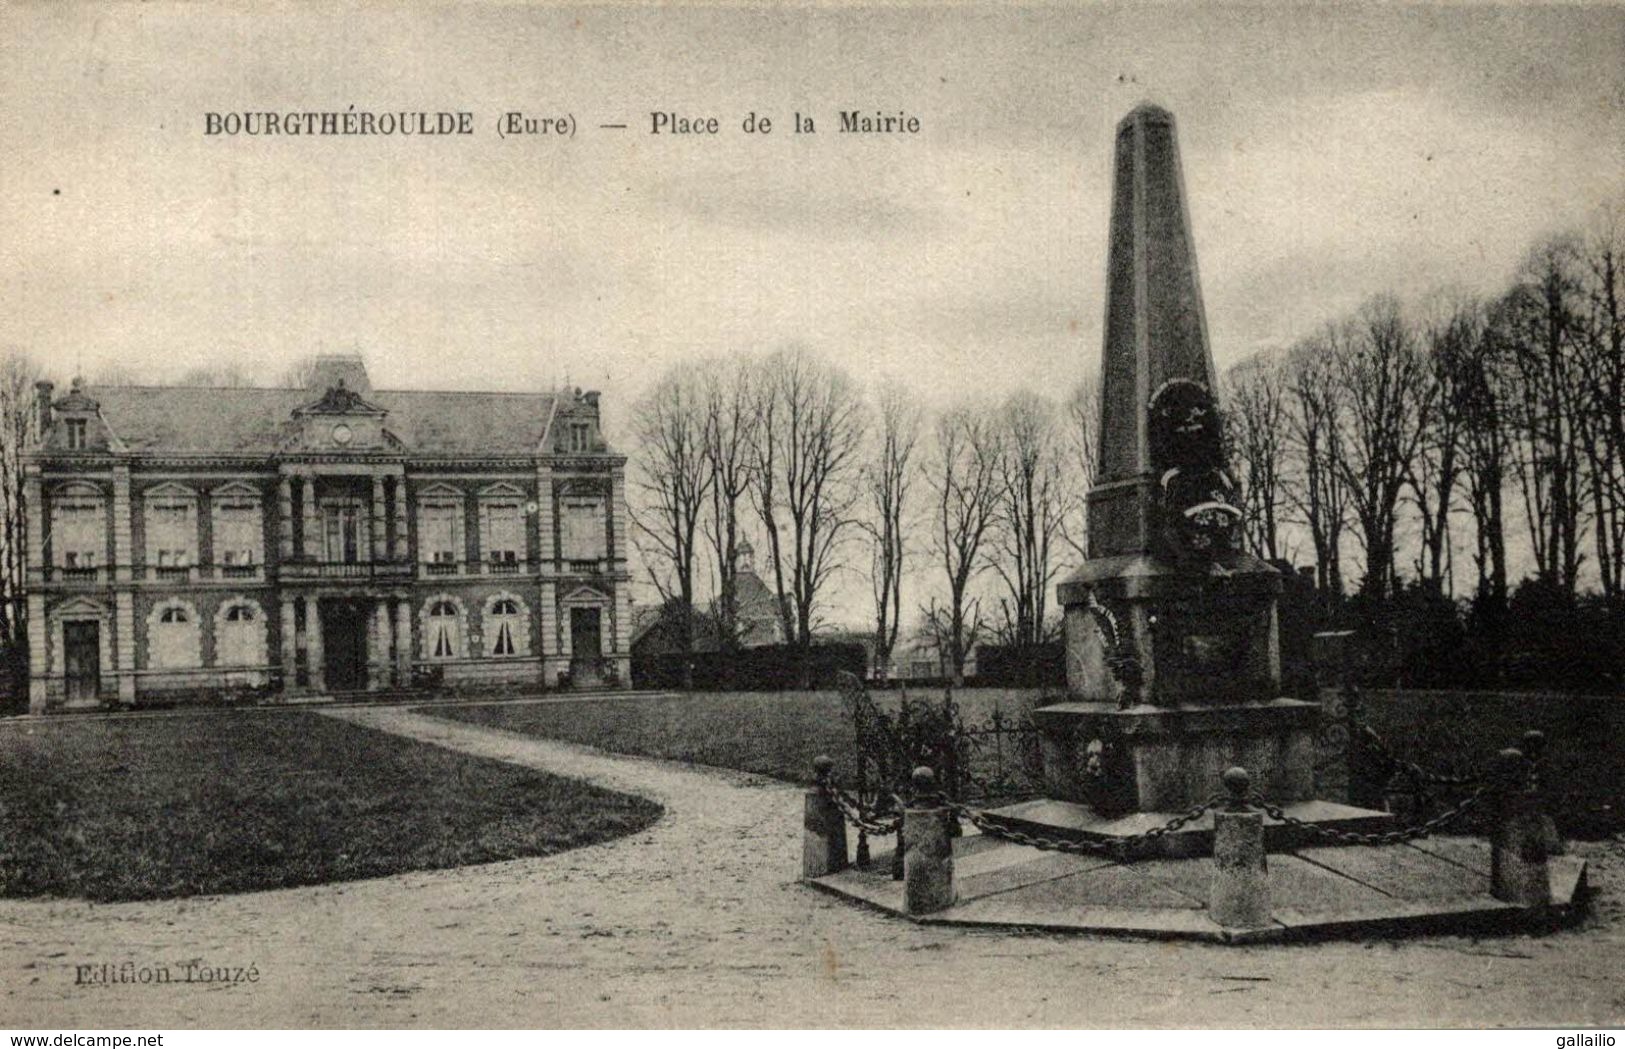 BOURGTHEROUDE PLACE DE LA MAIRIE - Bourgtheroulde